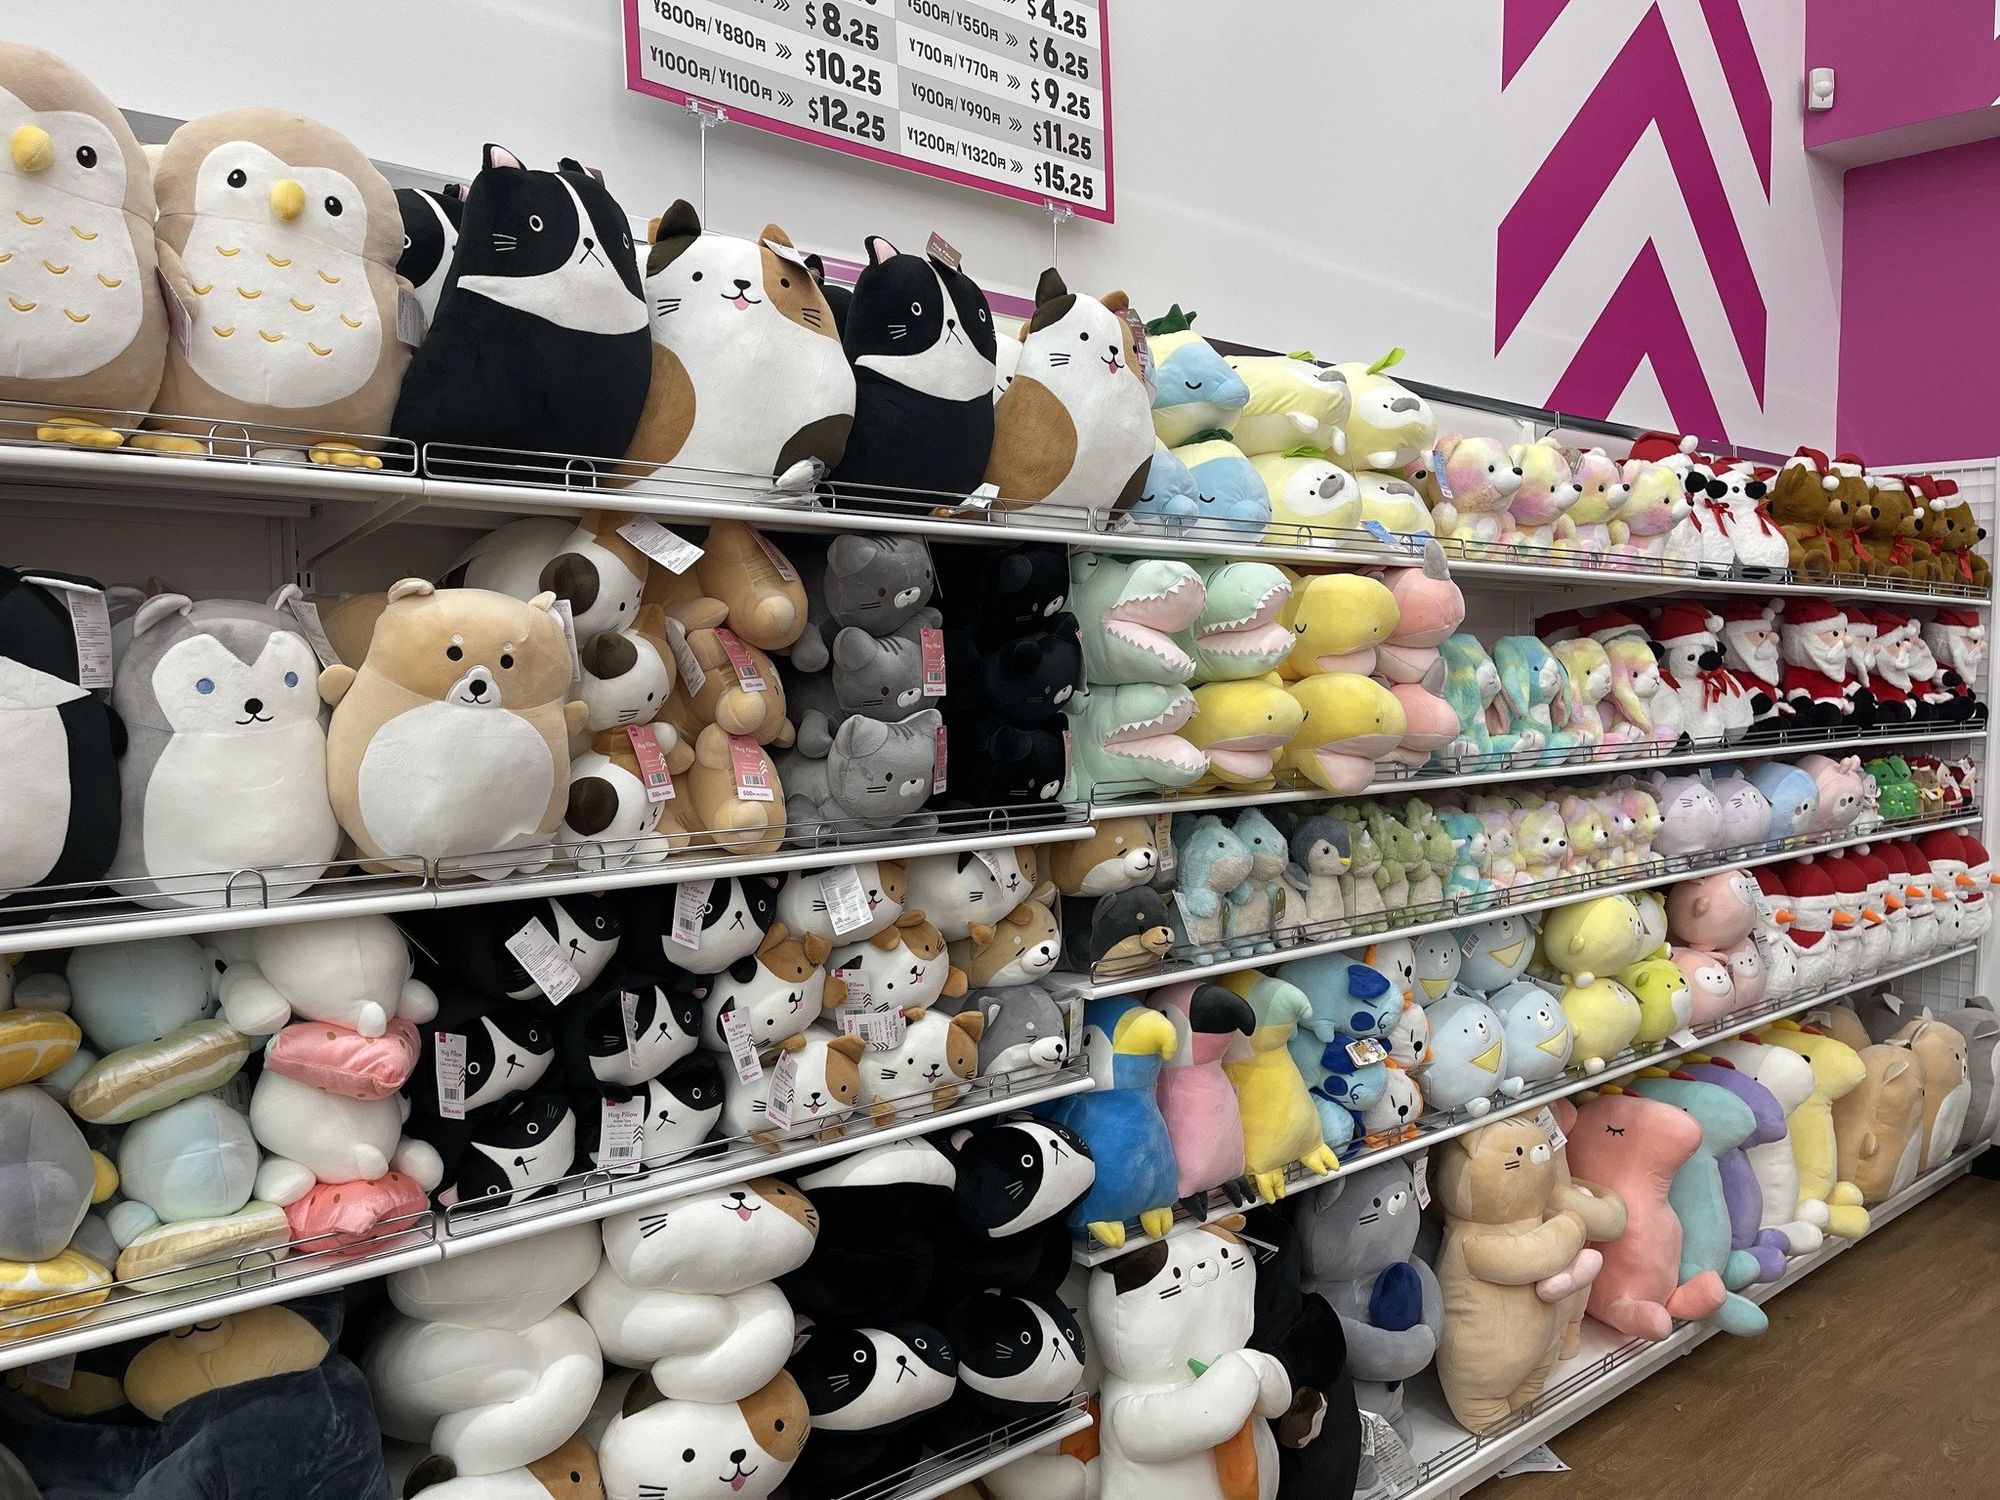 Miniso to open 15 more U.S. stores by year end, including 100th